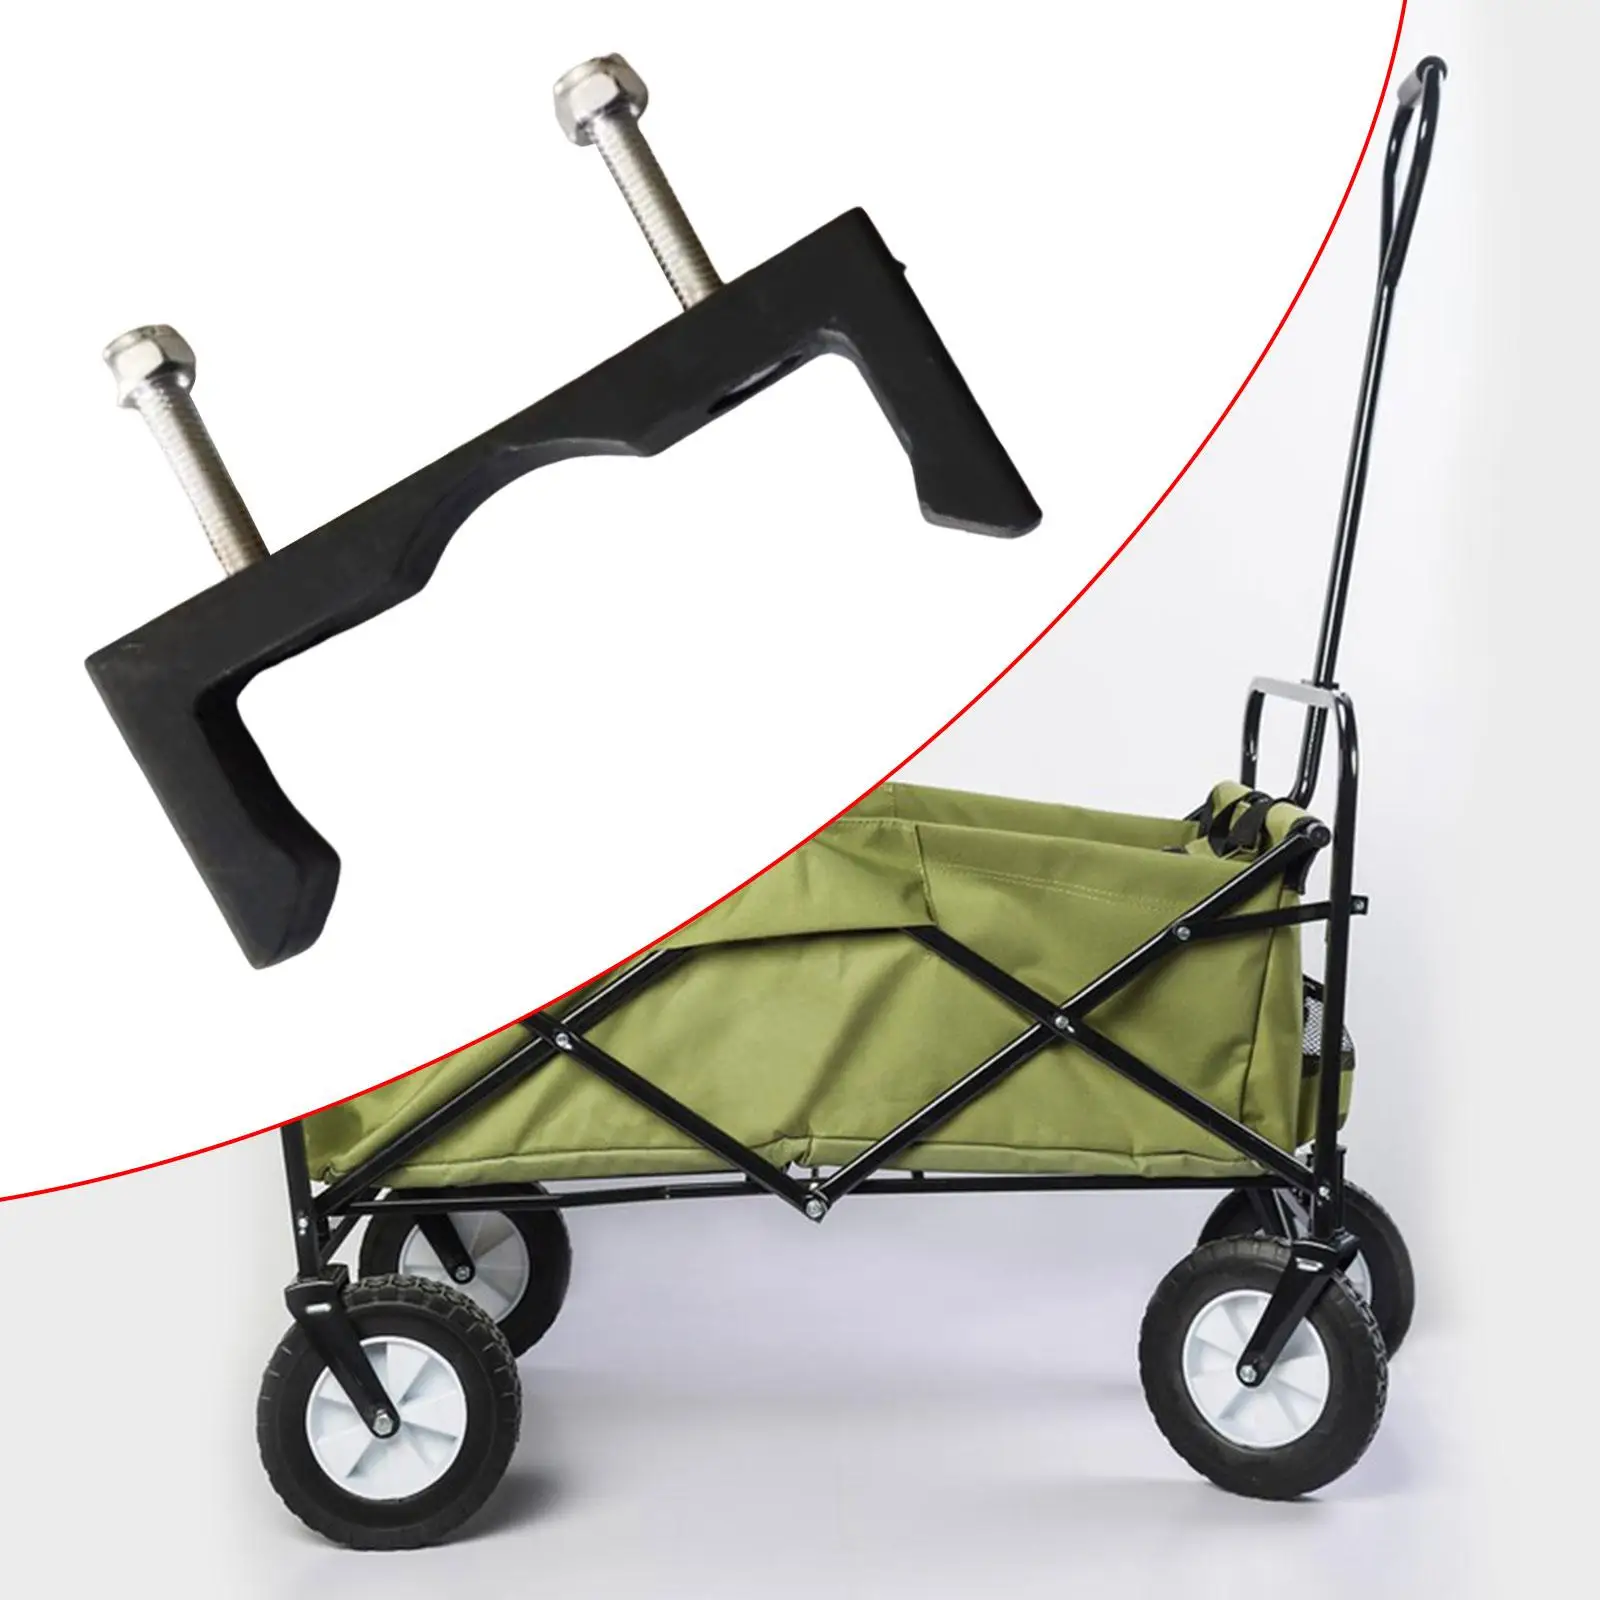 Folding Utility Wagon Pull Push Handle Fixed Buckle Parts, Compact Pull Push Handle Fixed Buckle, for Outdoors Camping